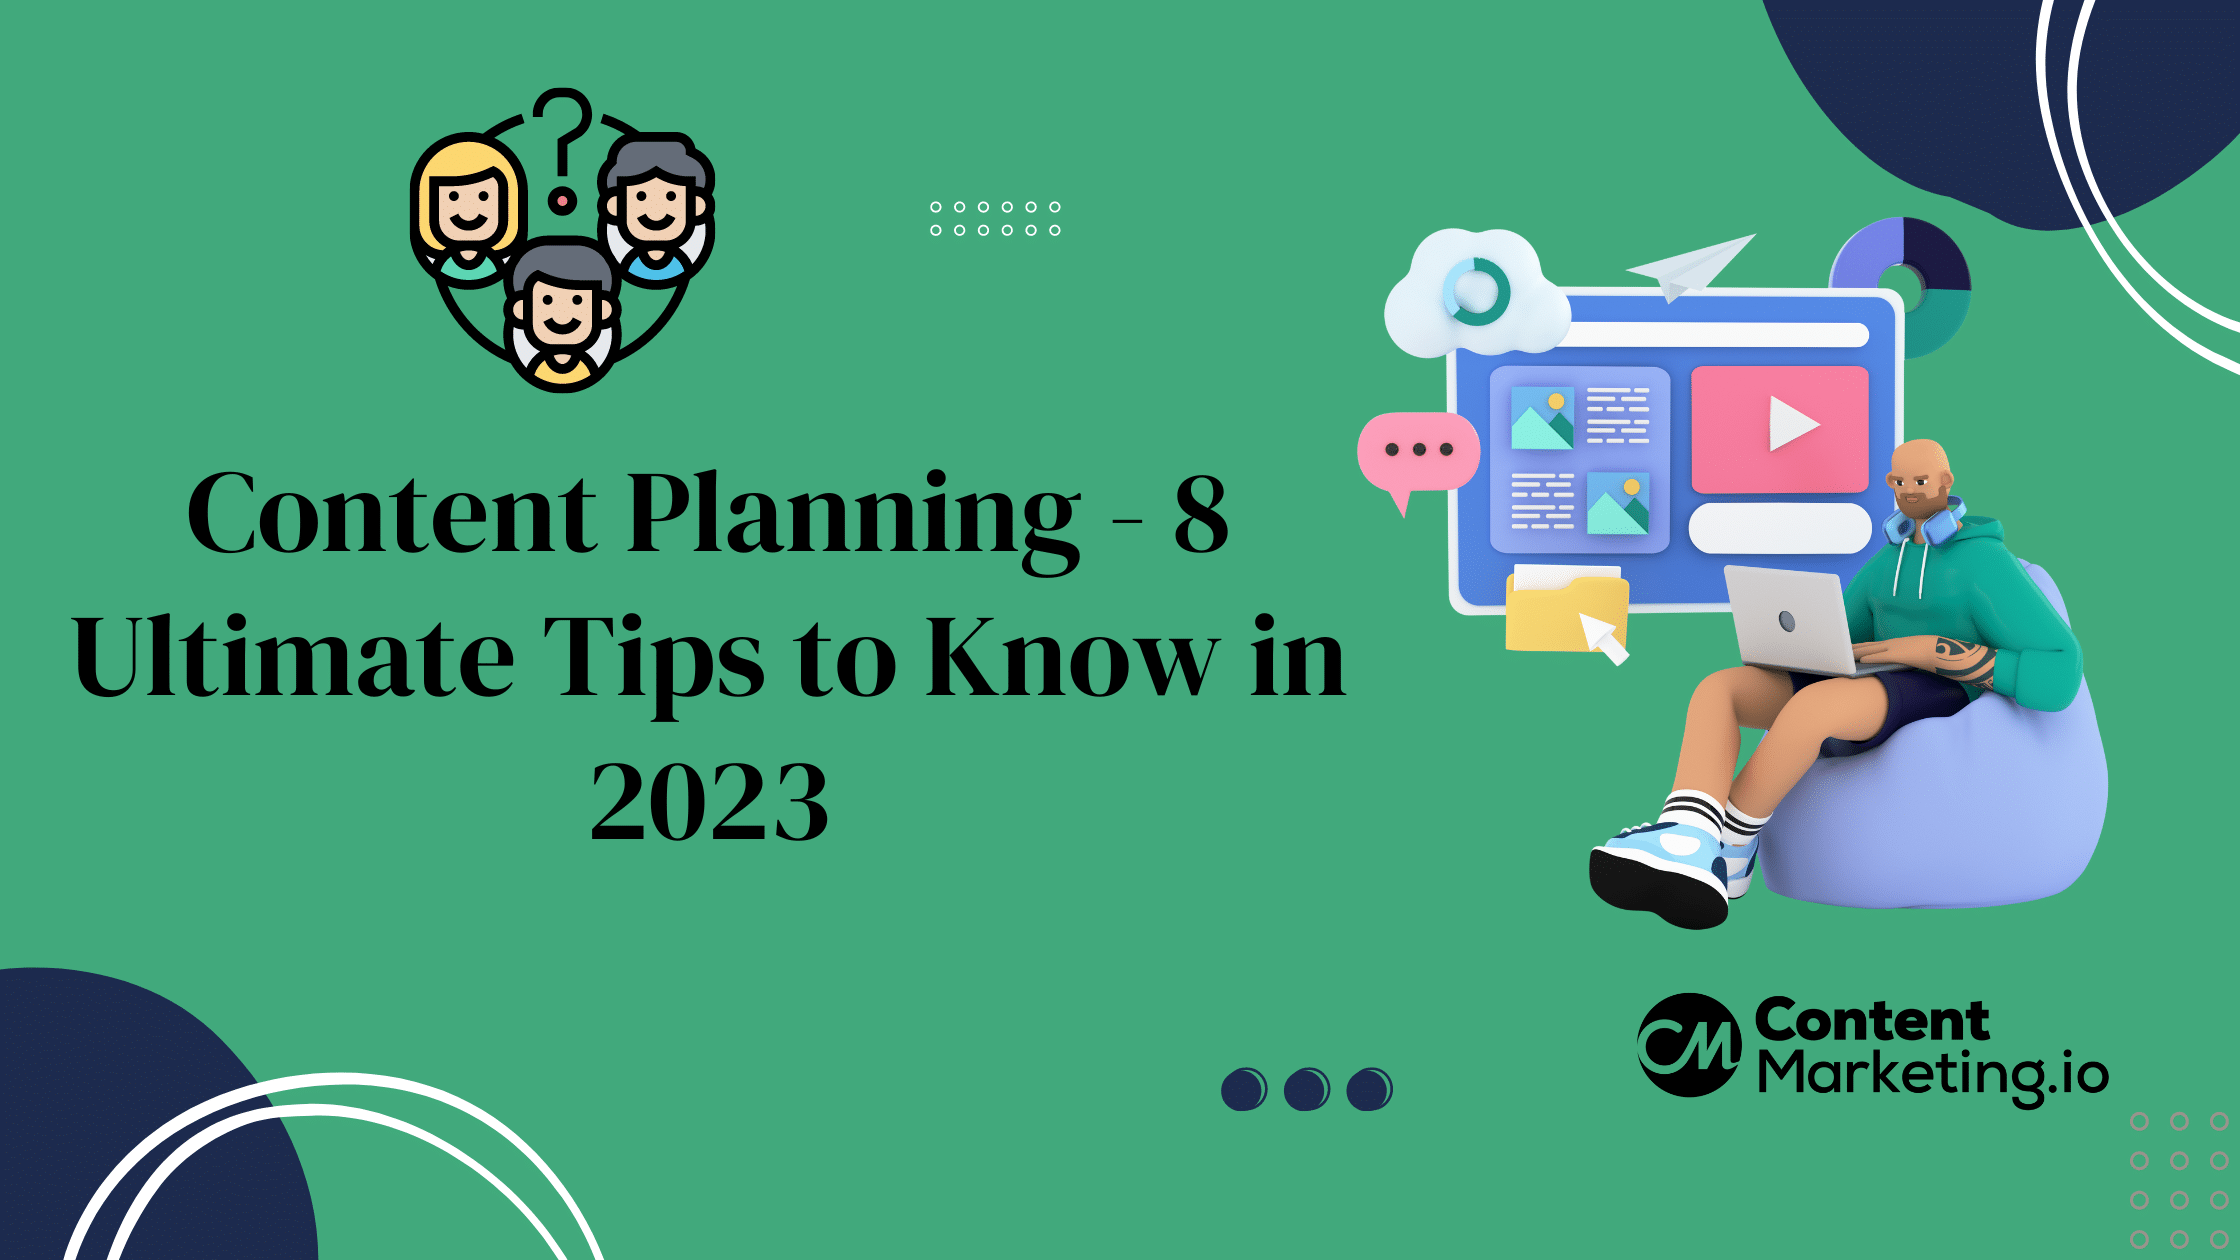 Content Planning - 8 Ultimate Tips to Know in 2023